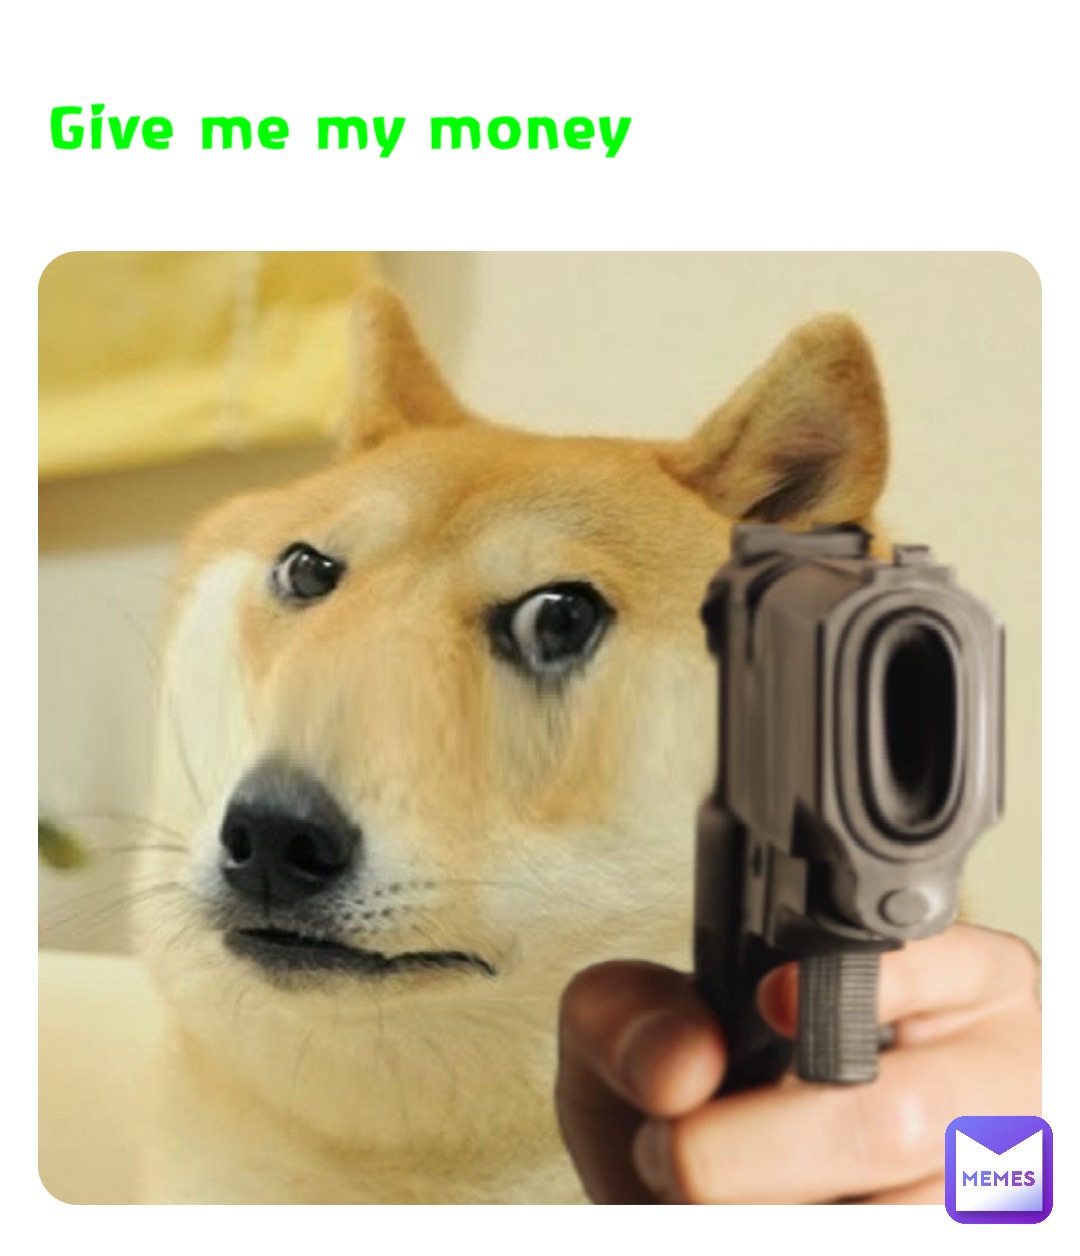 Give me my money